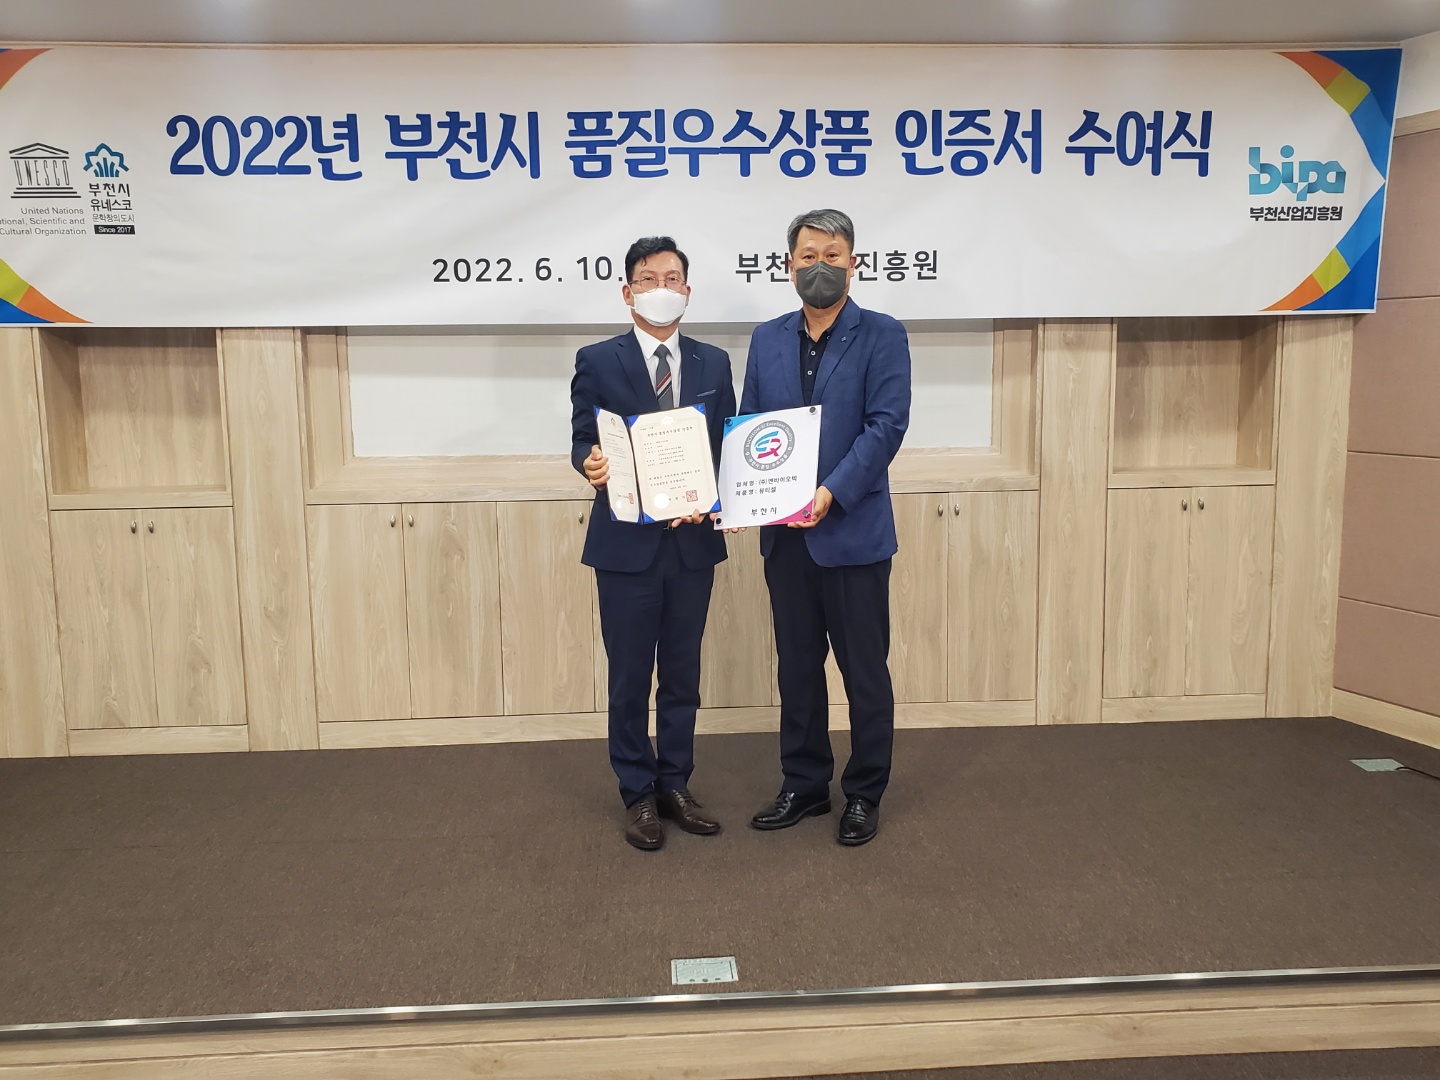 2022 Certification ceremony of the best quality goods  by the Bucheon City government of Korea Image